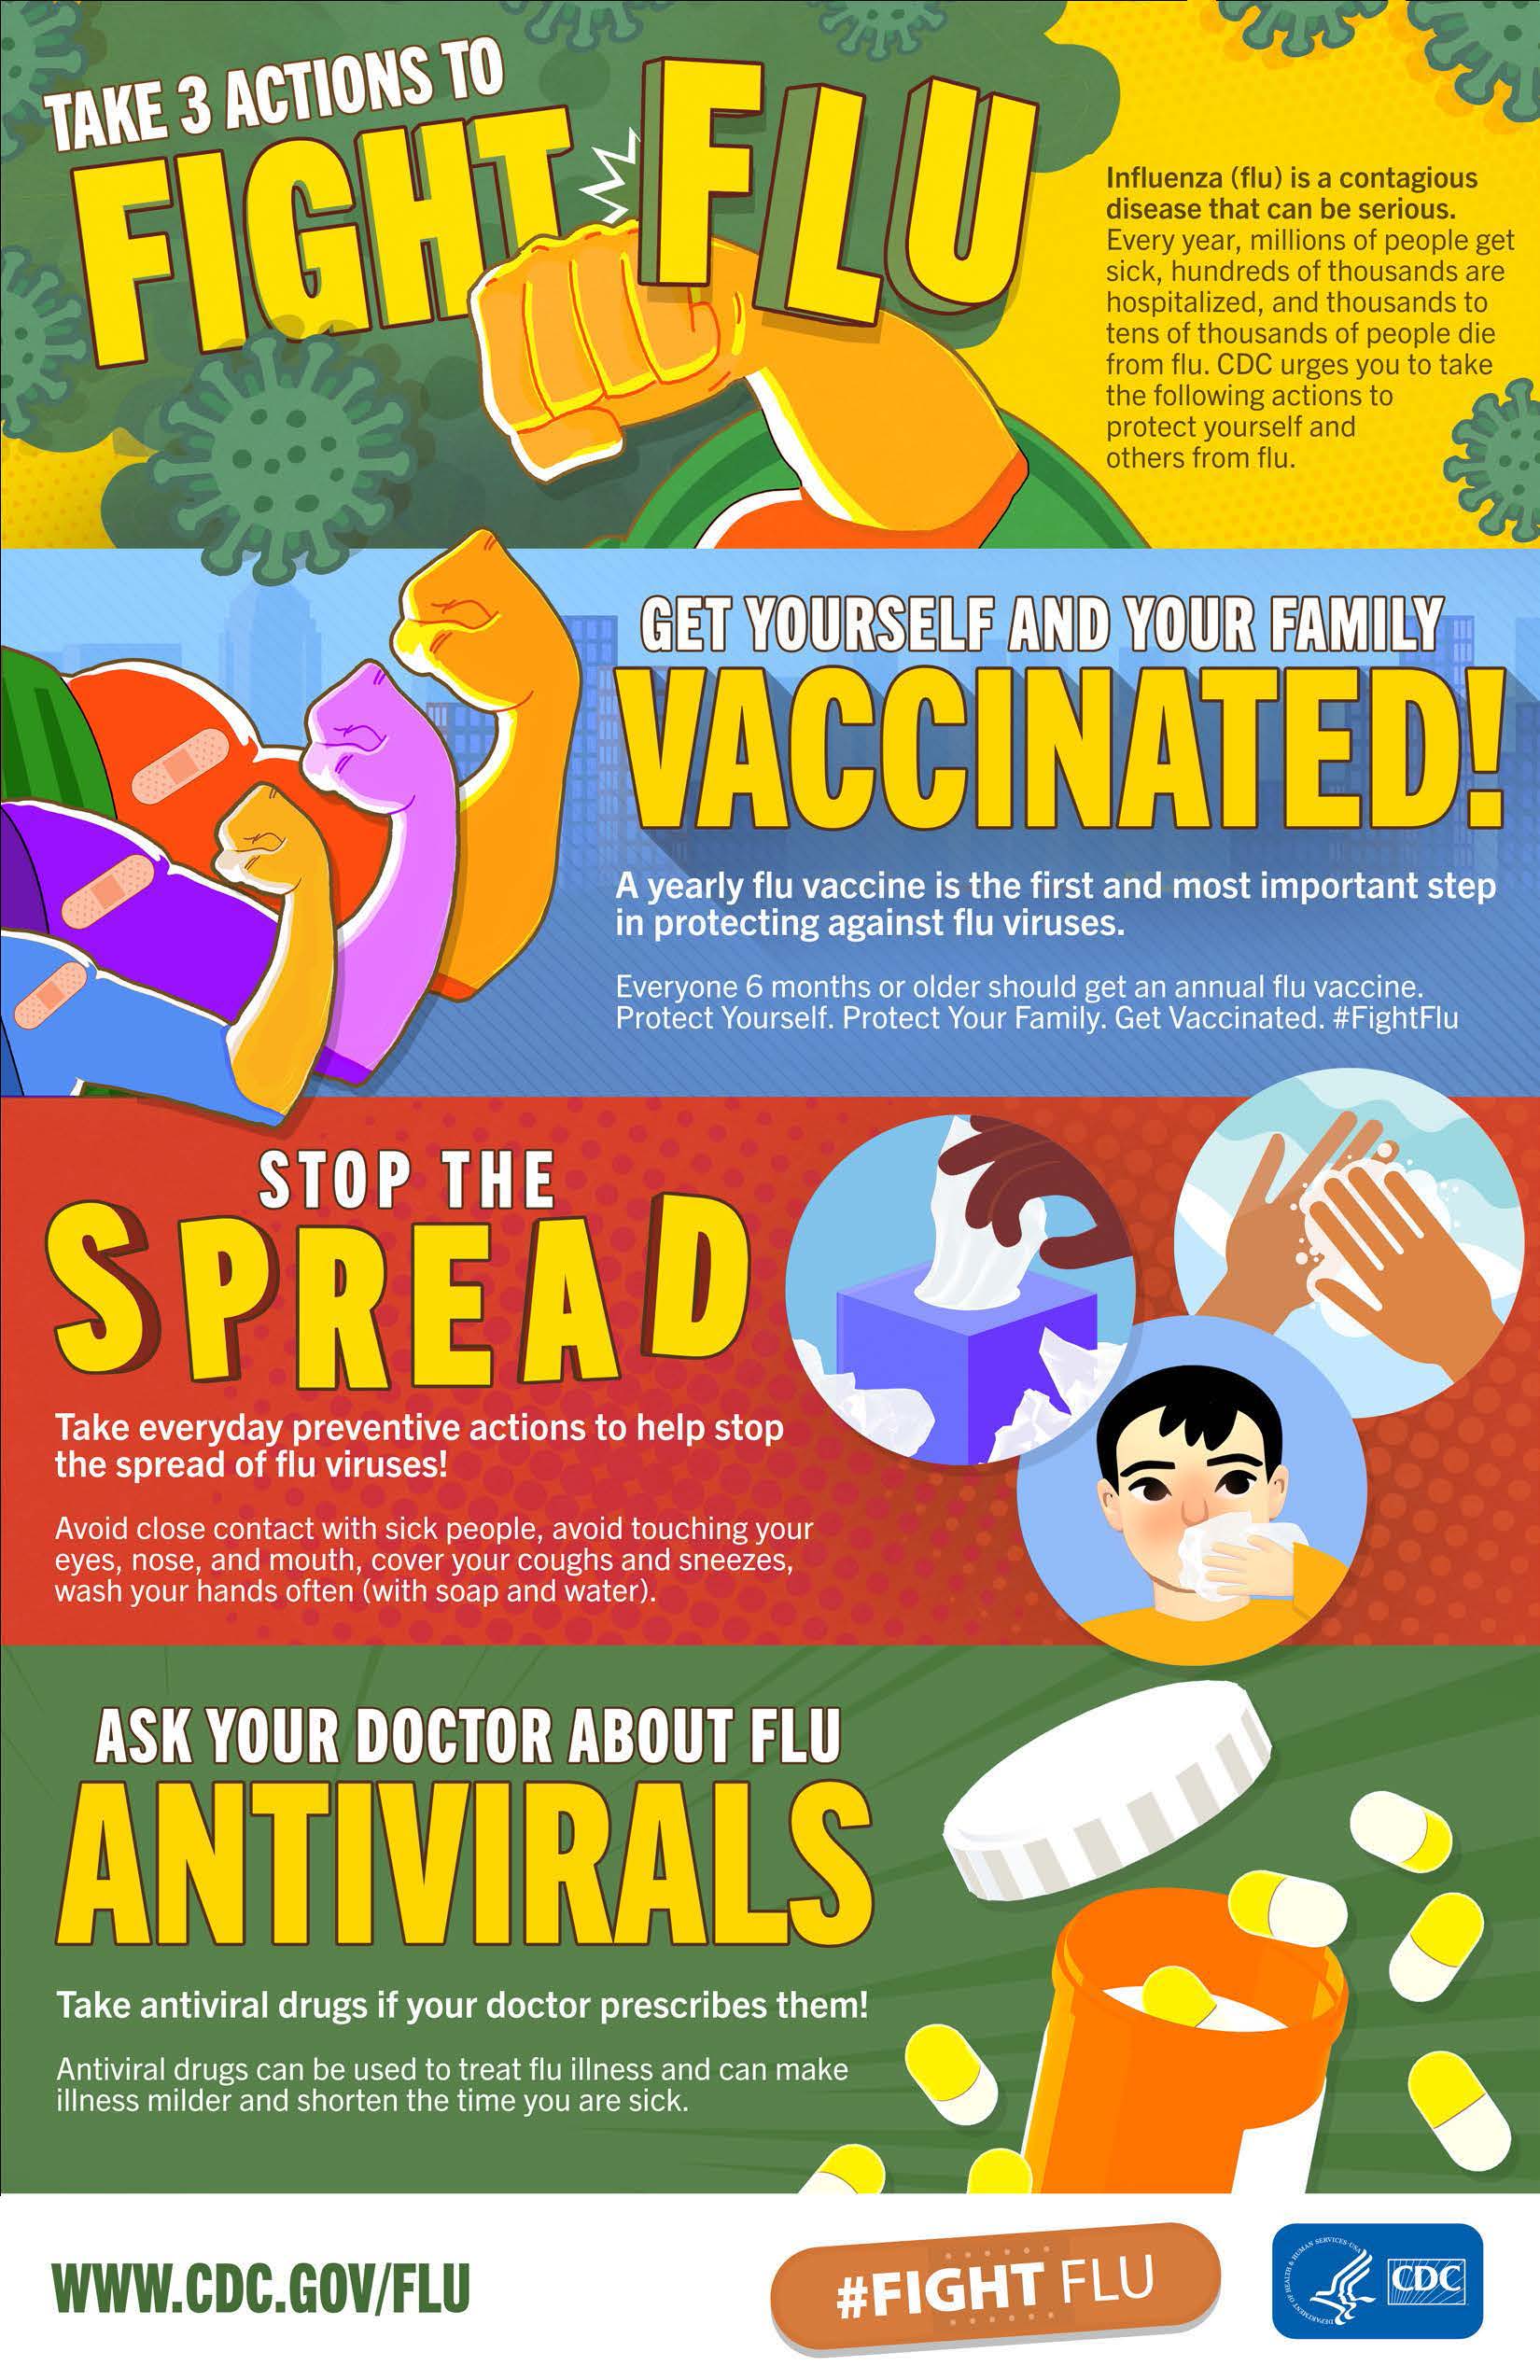 Take 3 Actions to Fight Flu infographic.jpg